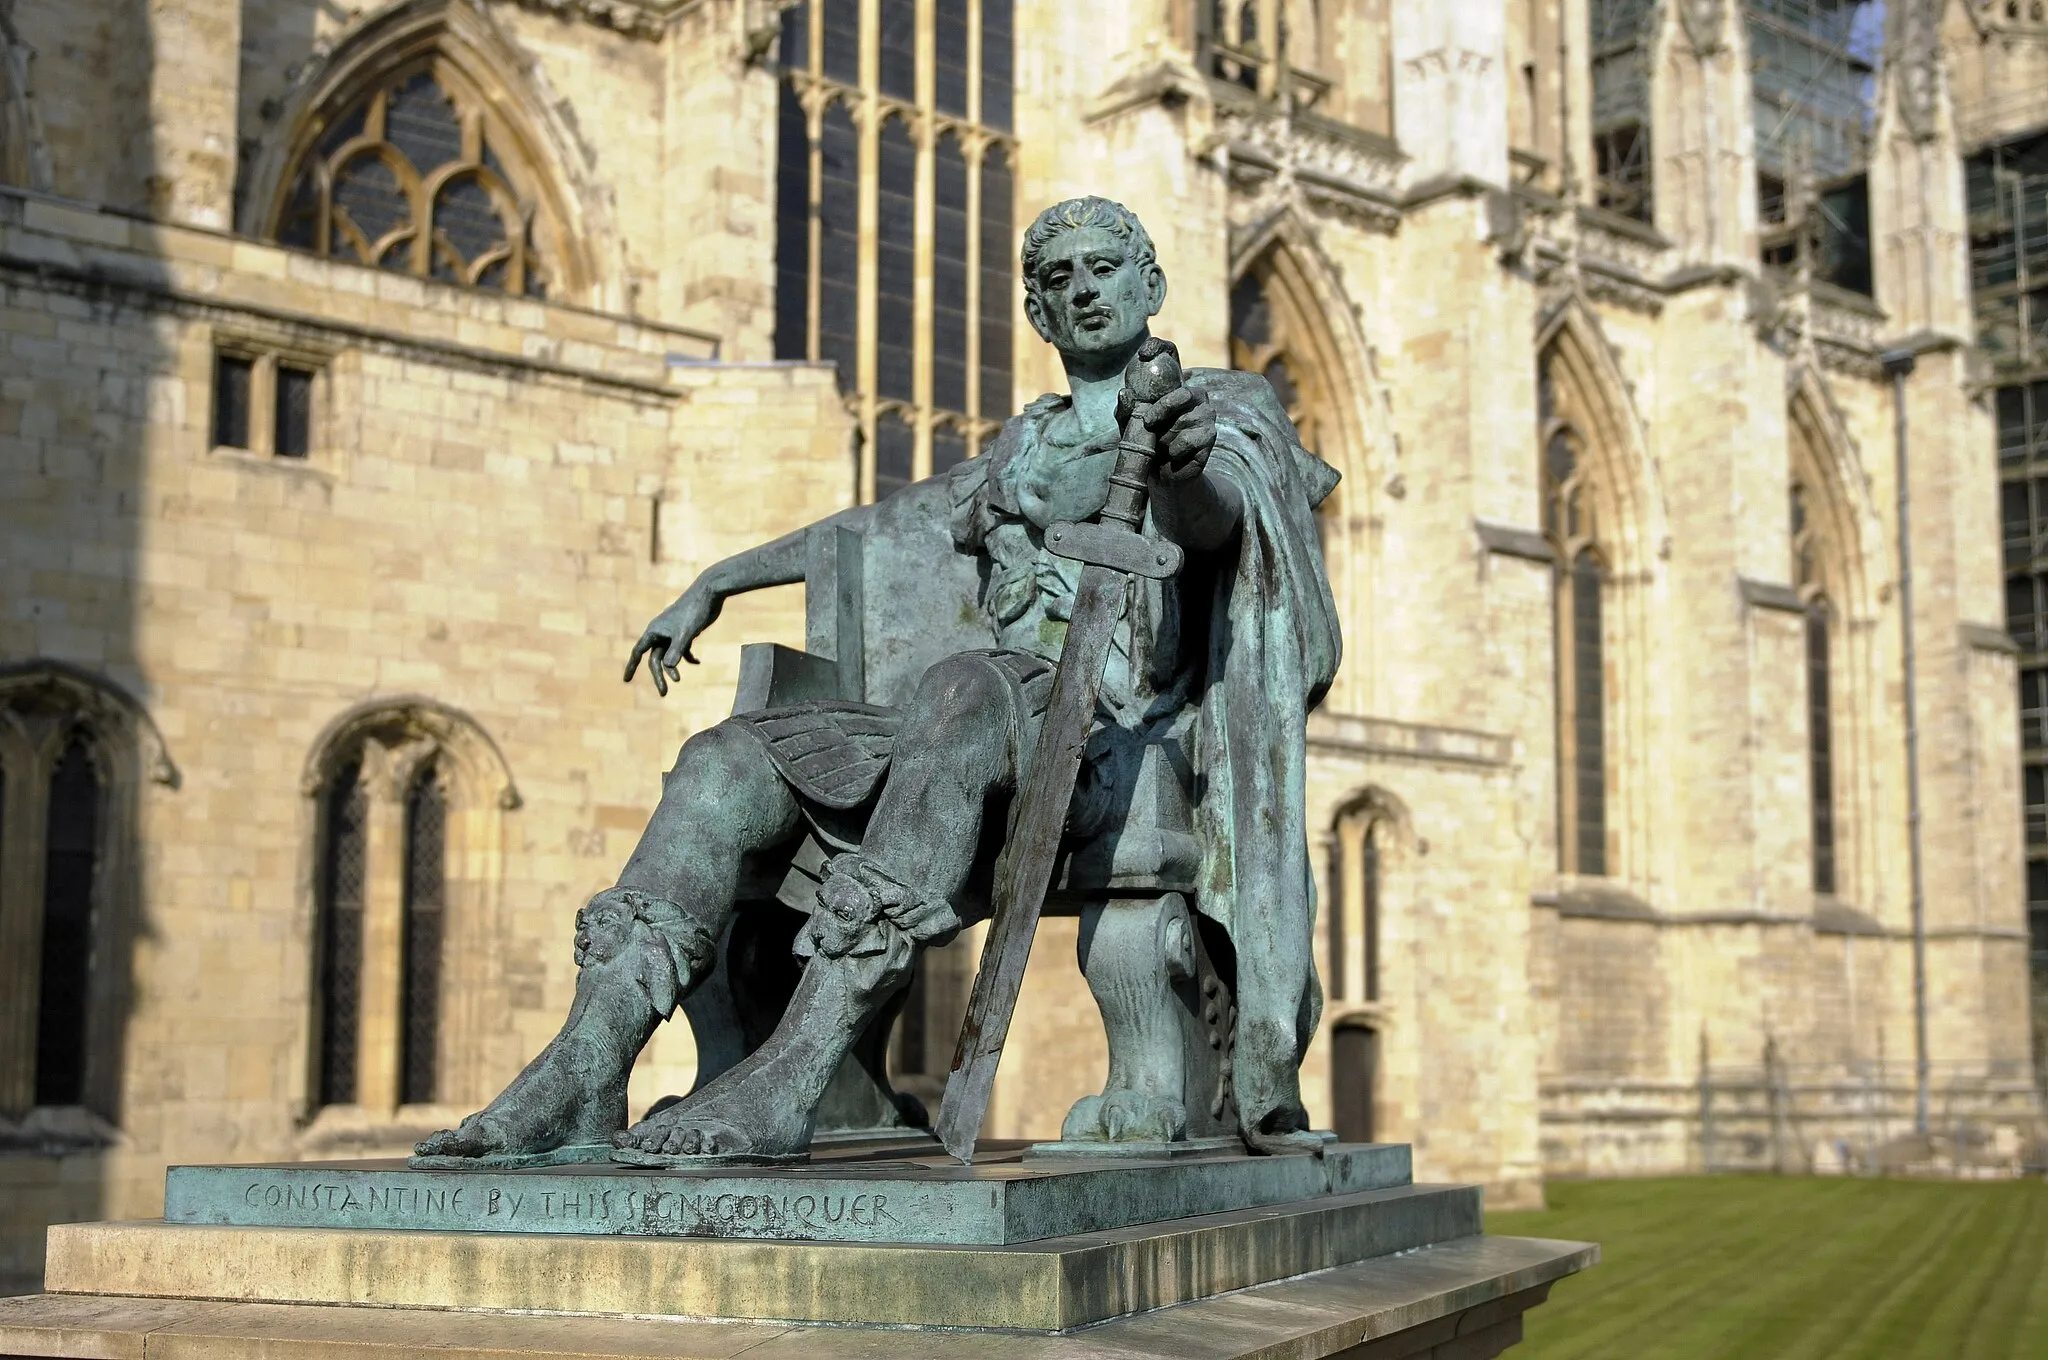 Photo showing: Bronze statue of Constantine the Great outside York Minster, England. The Emperor looks down upon his broken sword, which forms the shape of a cross. The statue was erected by the York Civic Trust and unveiled on 25 July 1998. (More facts)